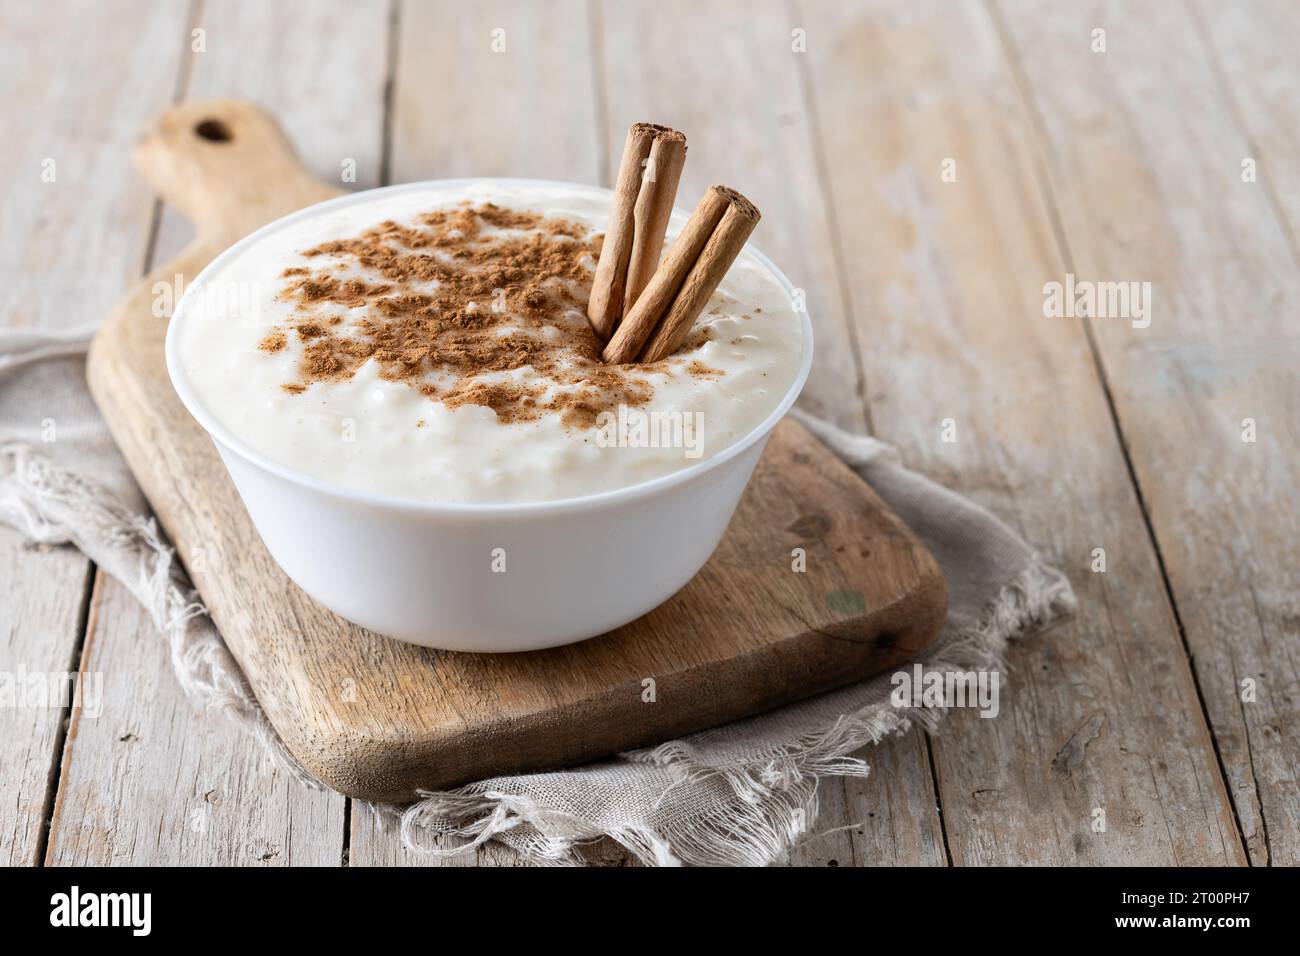 Arroz con leche. Rice pudding with cinnamon in bowl on wooden table Stock Photo